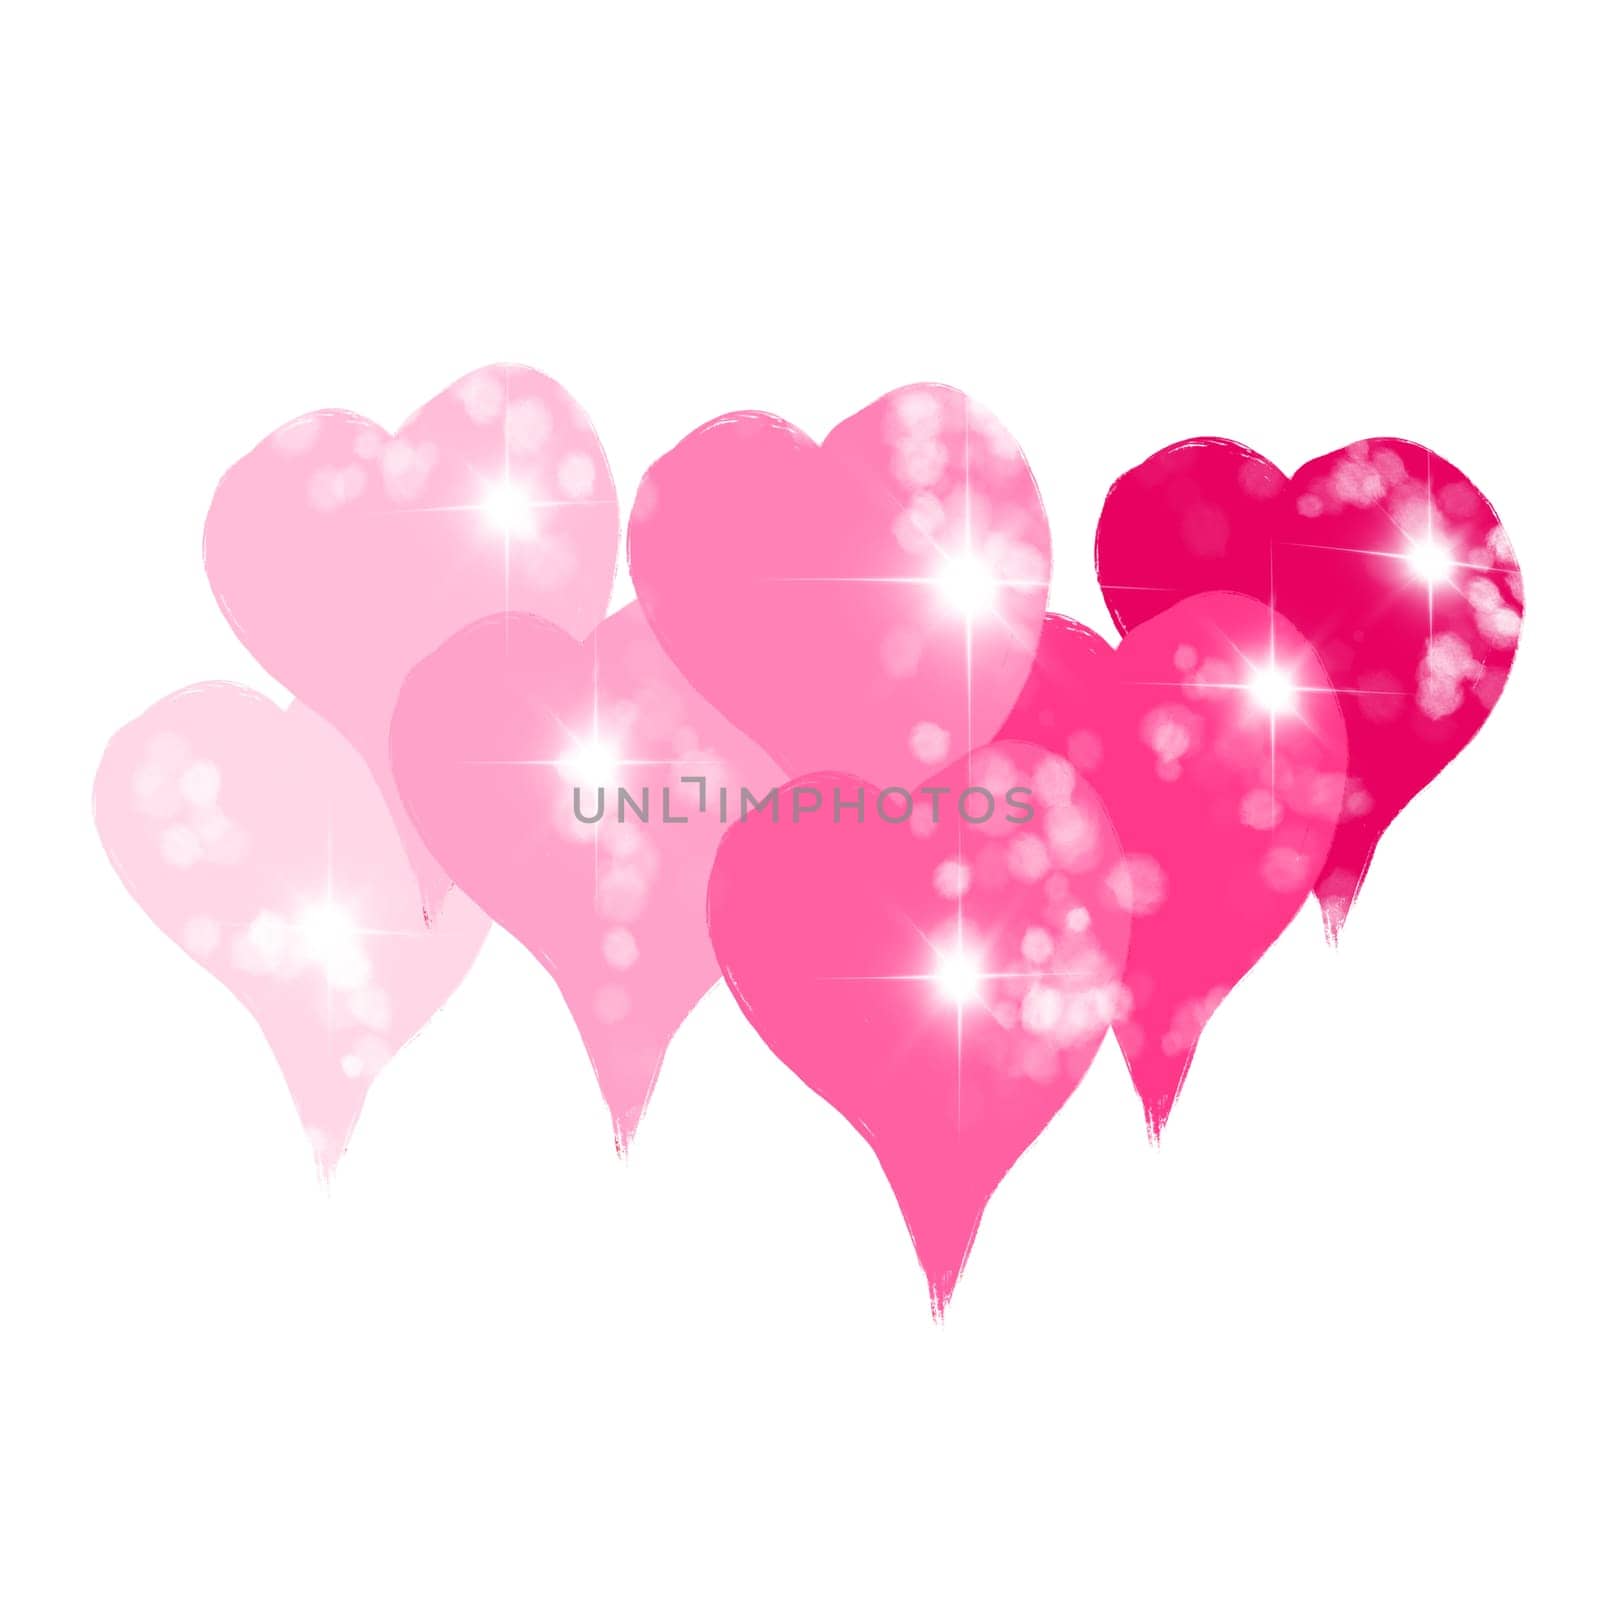 Hand drawn illustration with pink glitter shiny st valentines day hearts love. Cute romantic doodle on white background, wrapping paper textile, valentine texture symbol fabric print, simple shapes